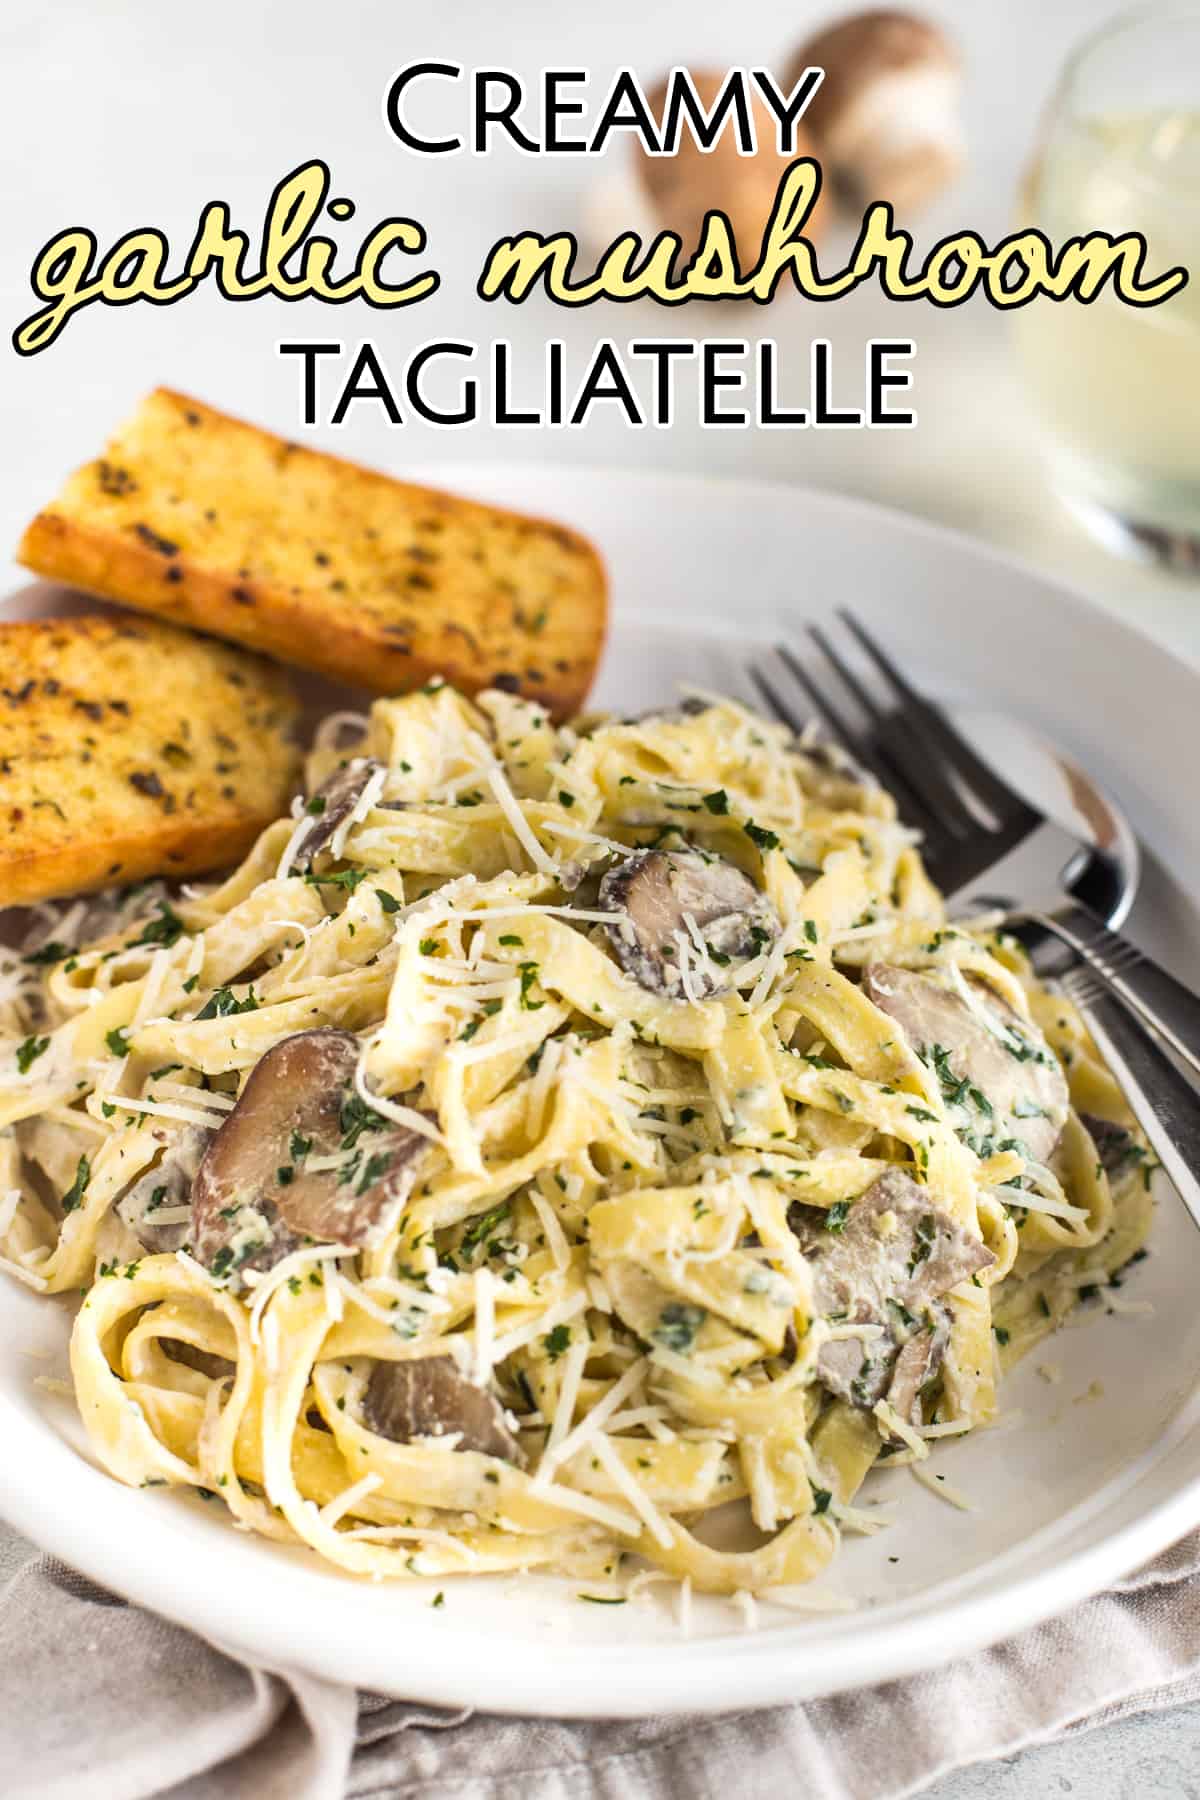 Portion of creamy garlic mushroom tagliatelle topped with parmesan and parsley.